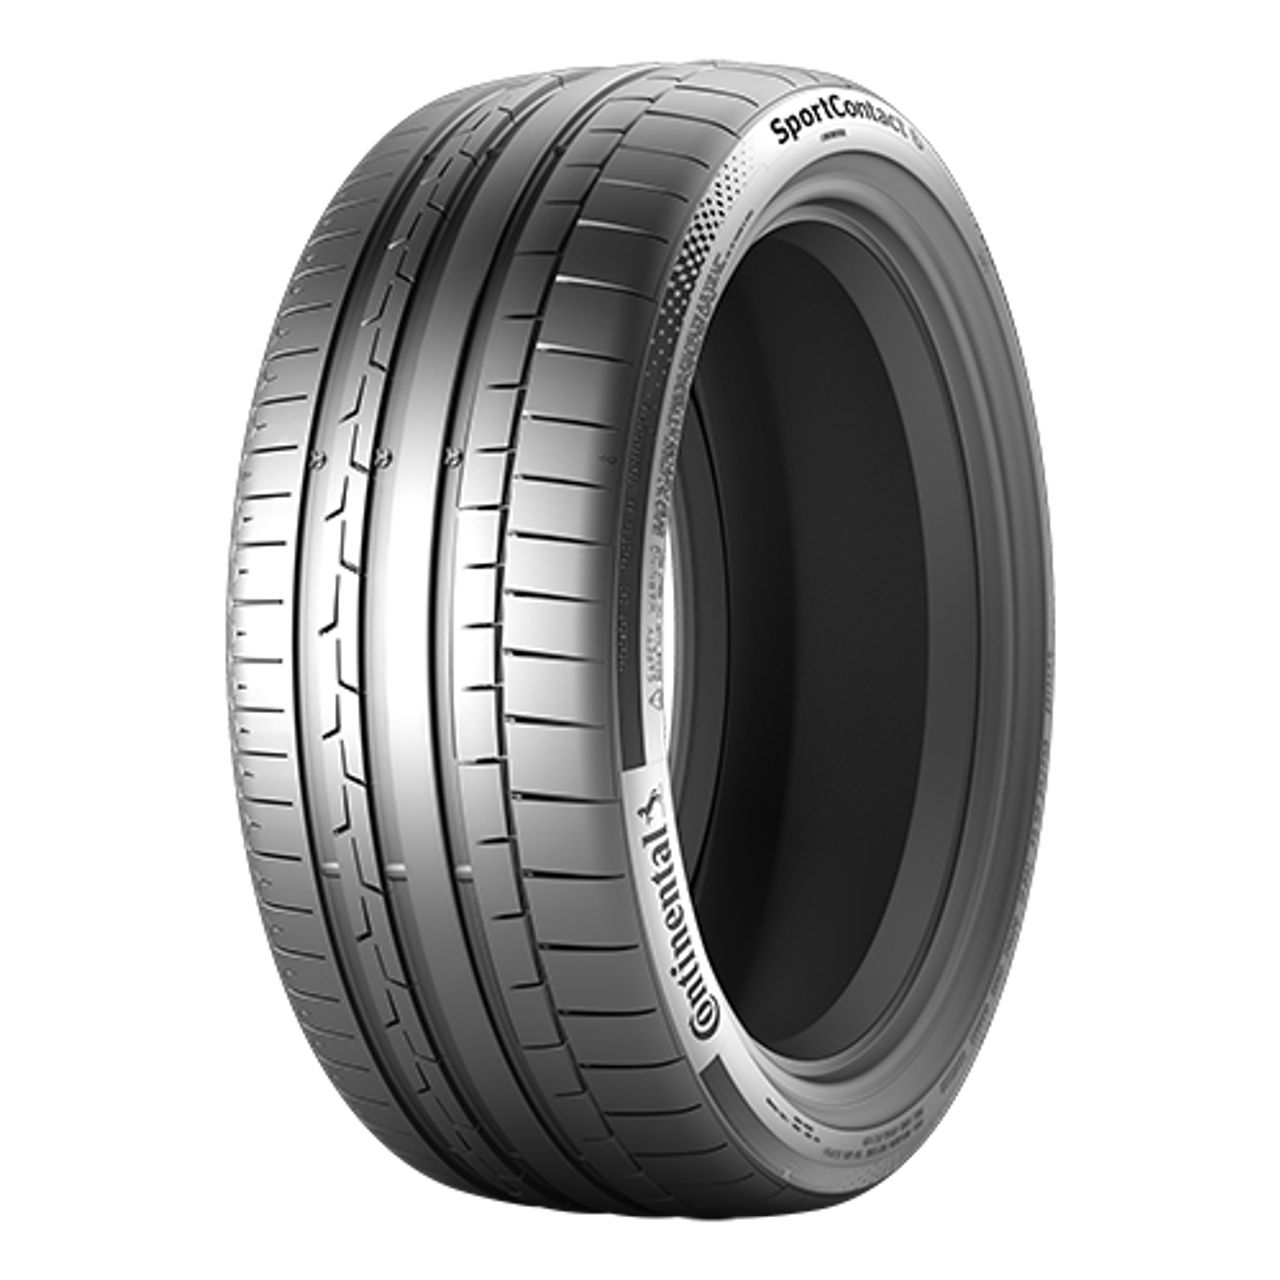 CONTINENTAL SPORTCONTACT 6 (AO) (EVc) 265/35ZR19 98(Y) CONTISILENT FR XL